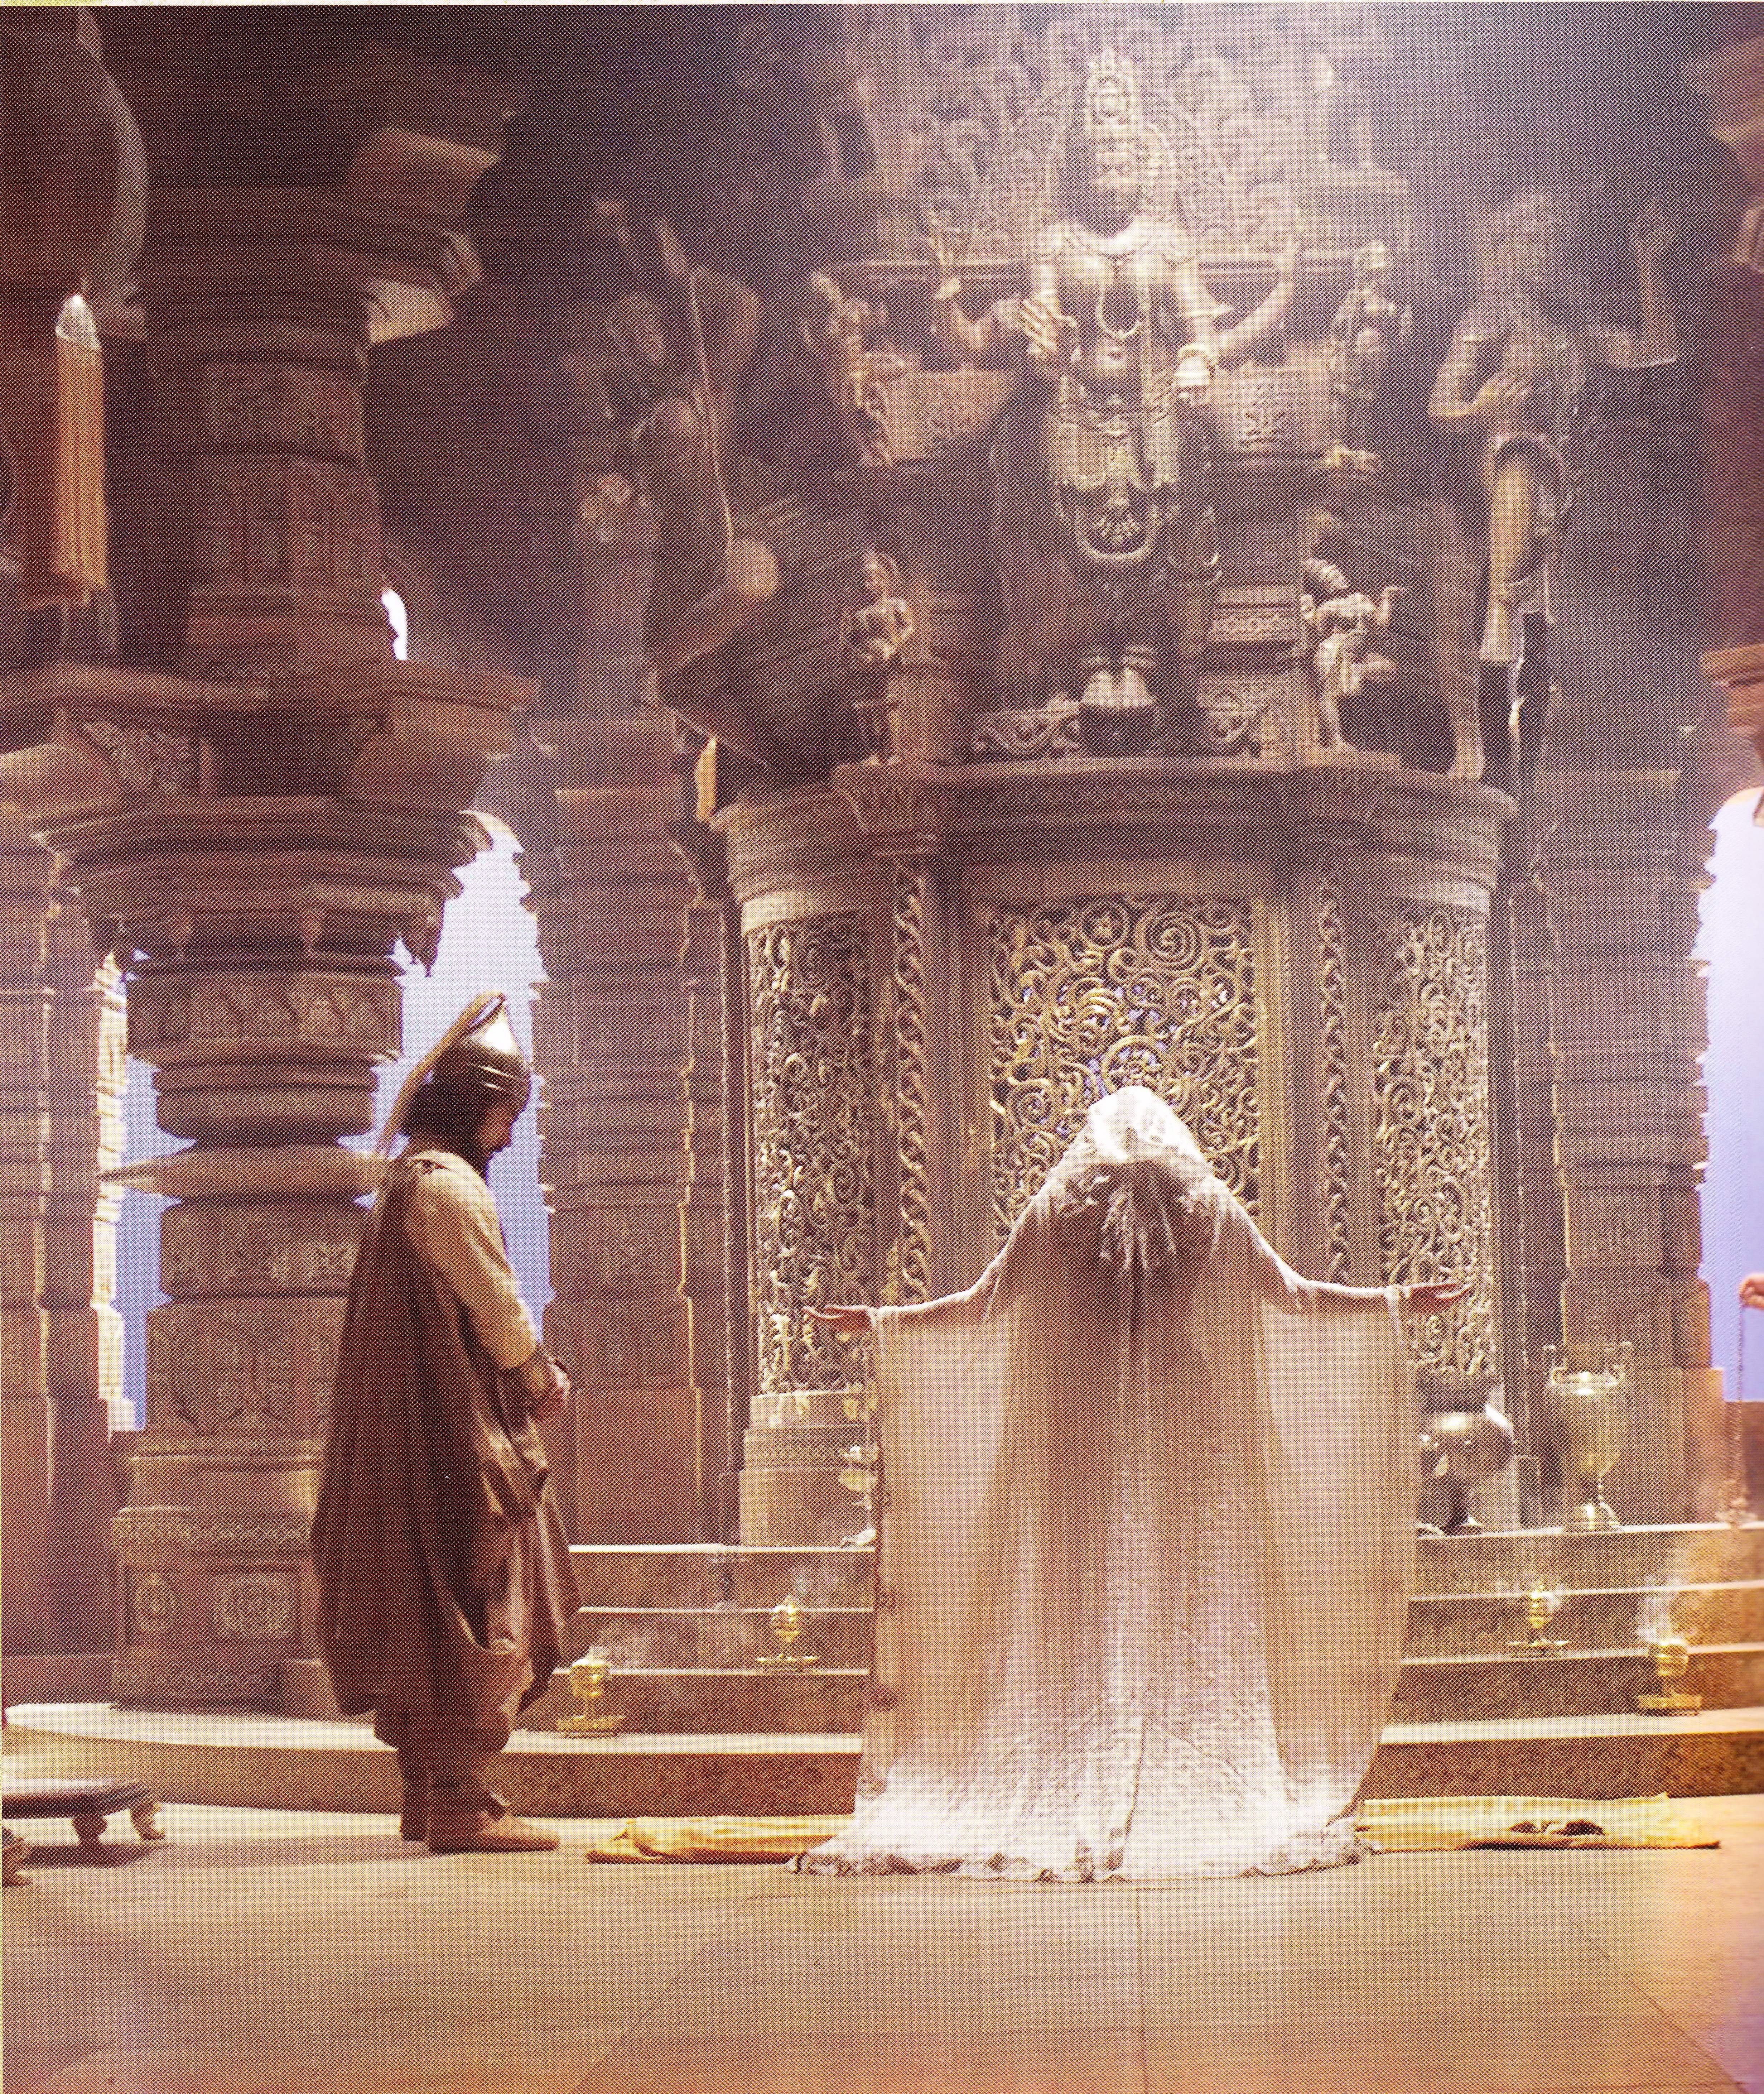 As Asoka with Princess Tamina (Gemma Arterton) in the Sky Chamber in Prince of Persia: Sands of Time